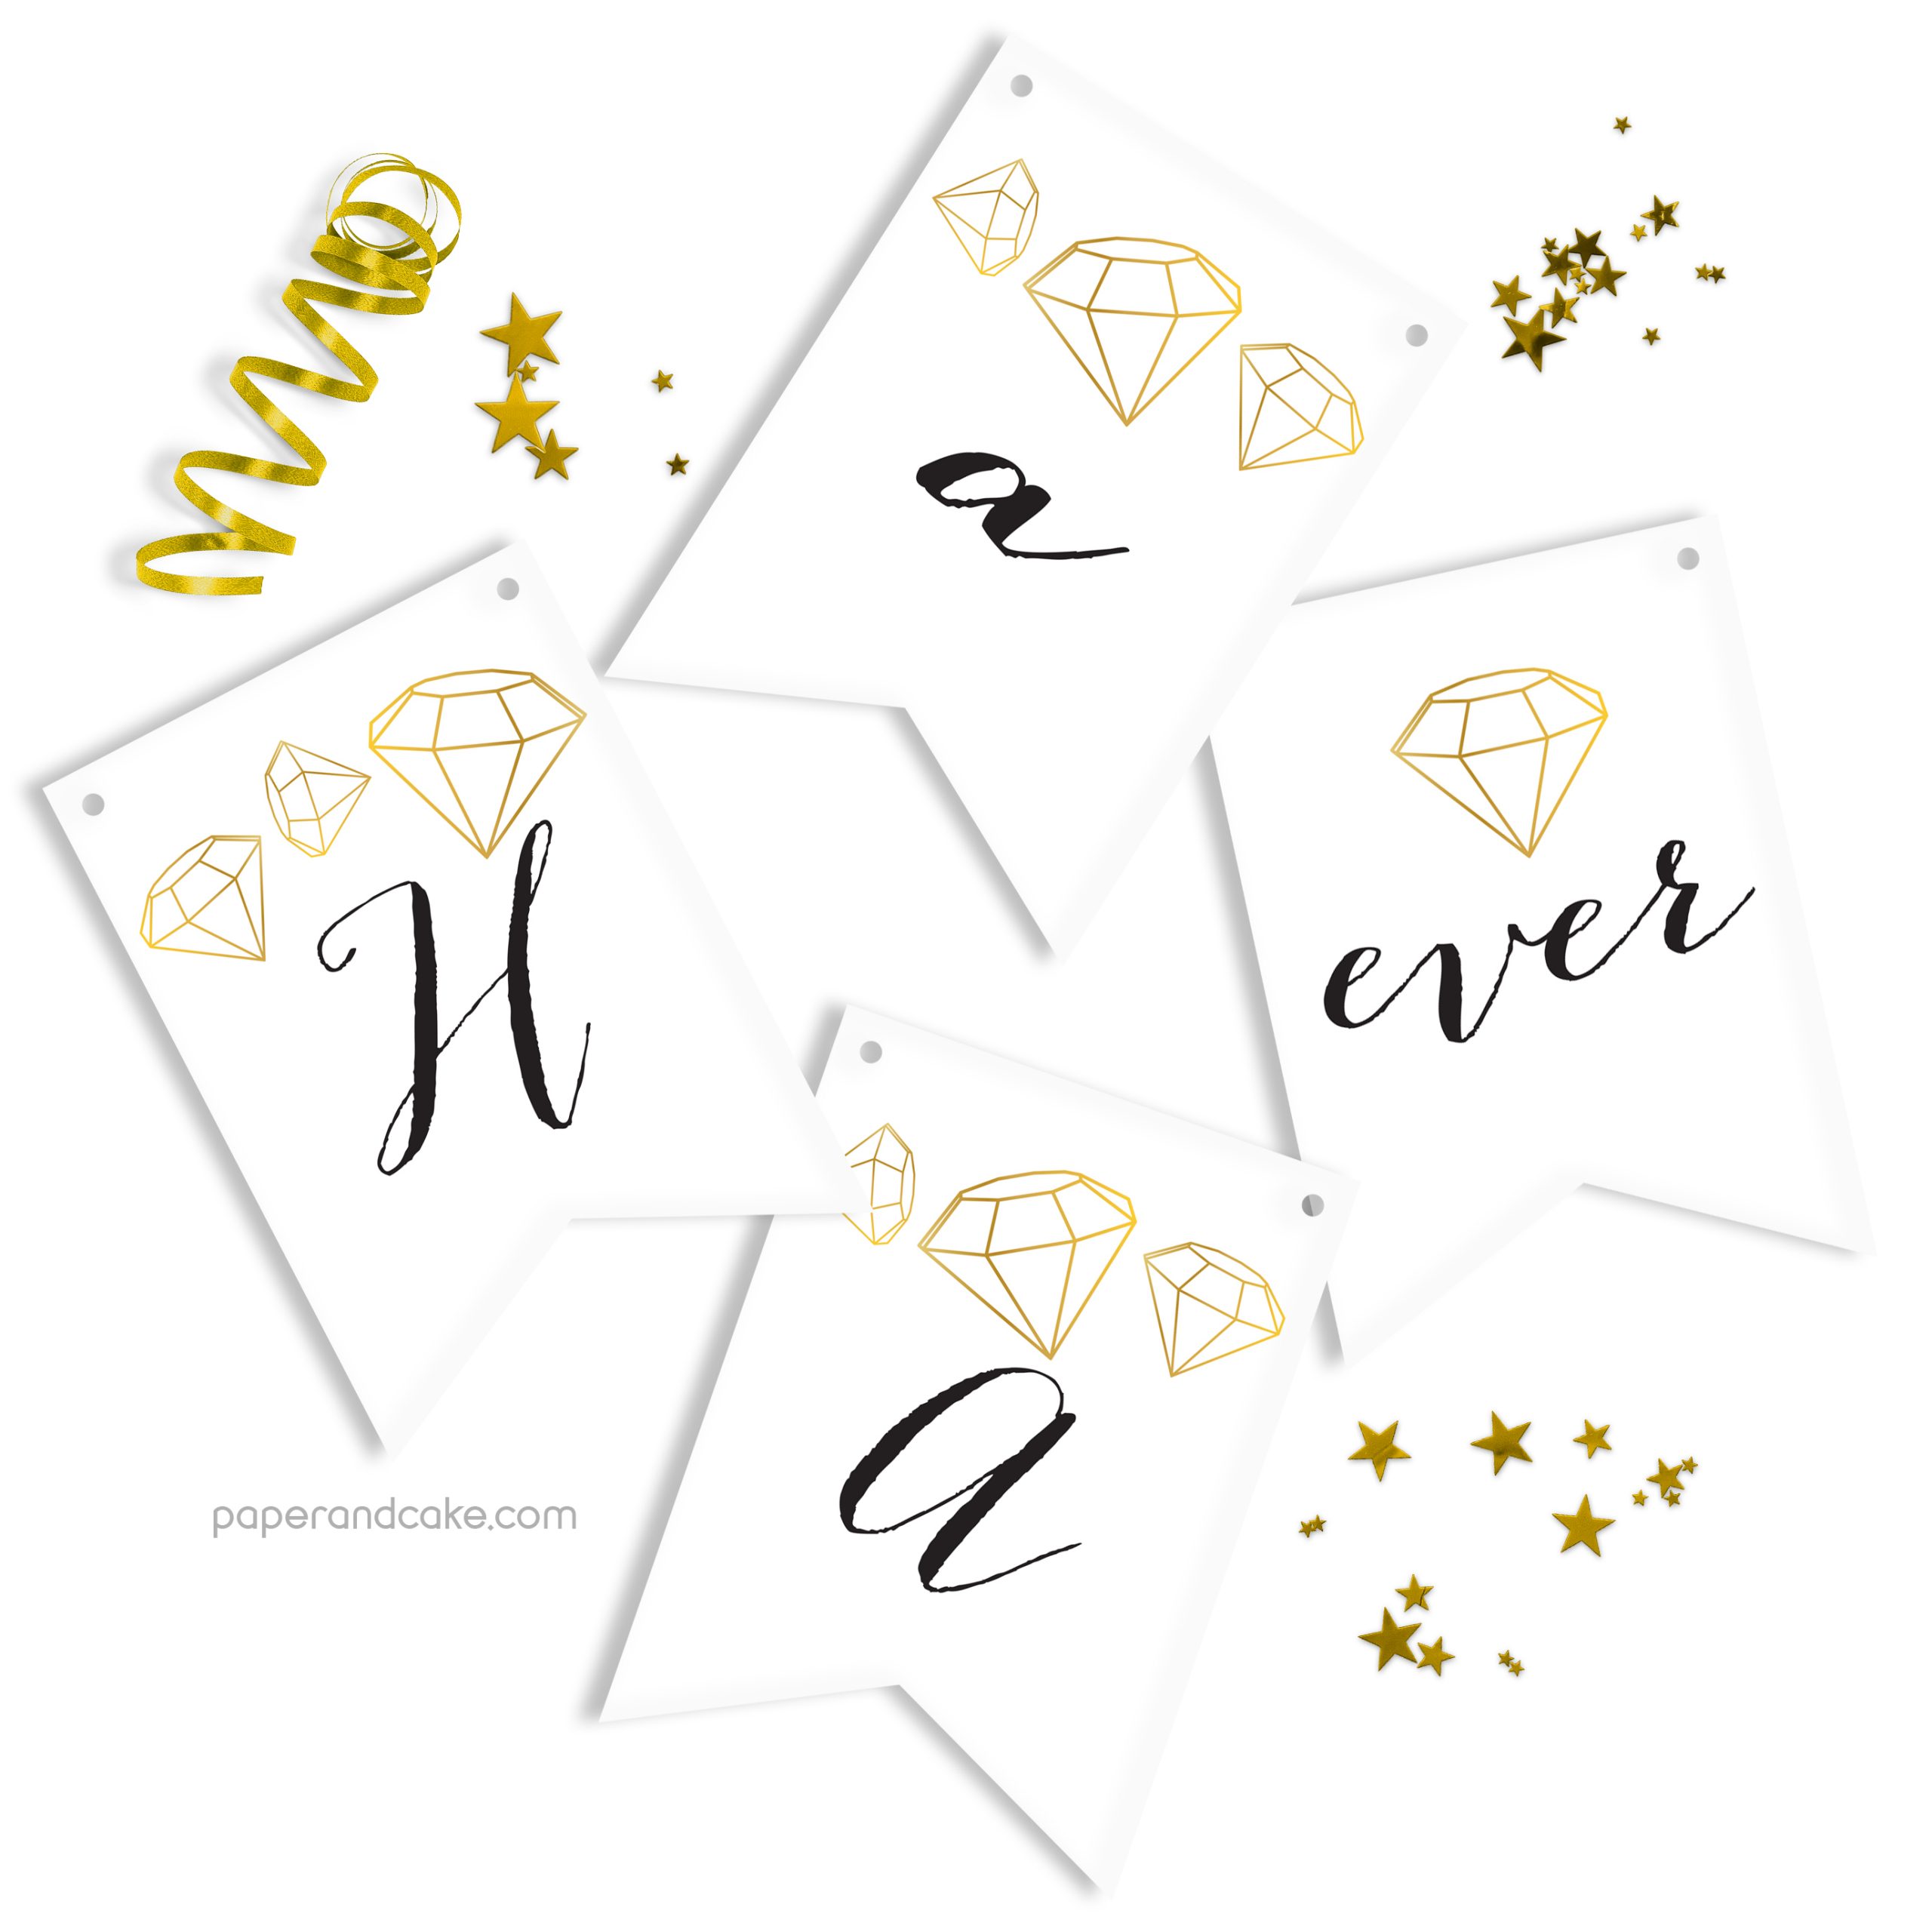 Happily ever After Bridal Pennant Banner